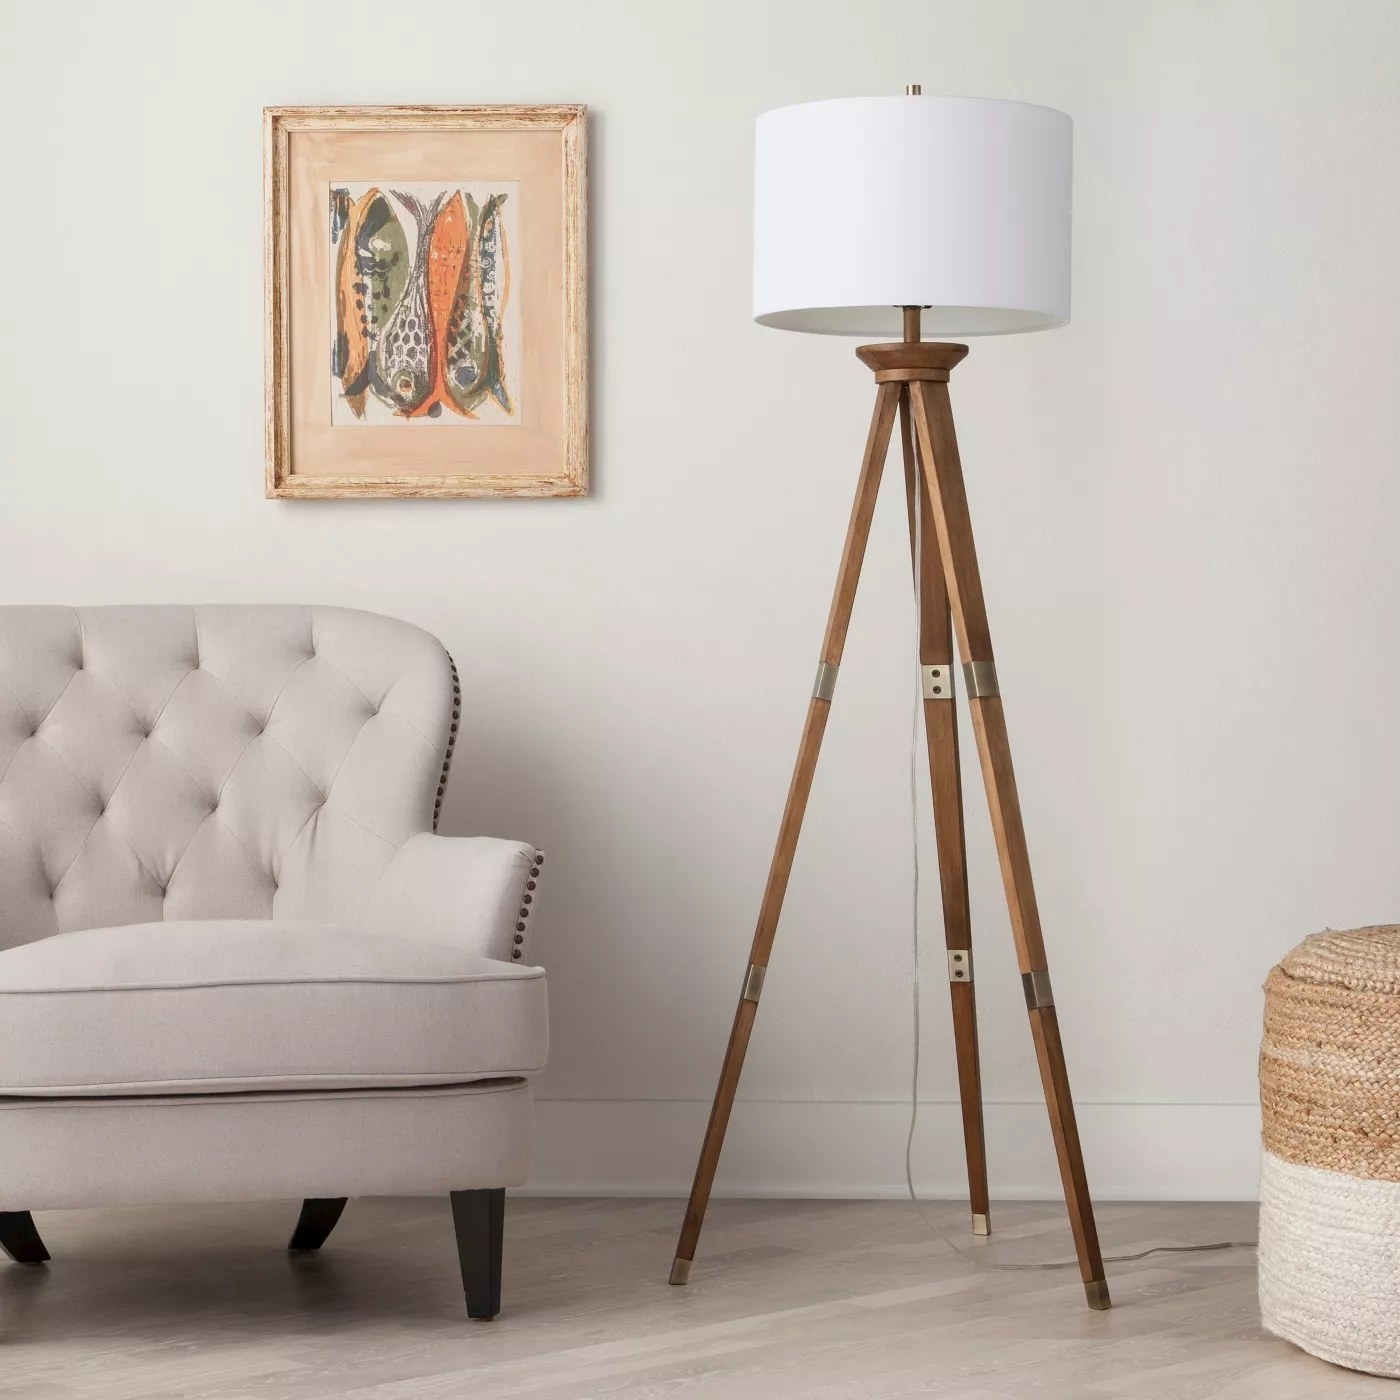 The tripod lamp with wooden legs and brass accents in a living room